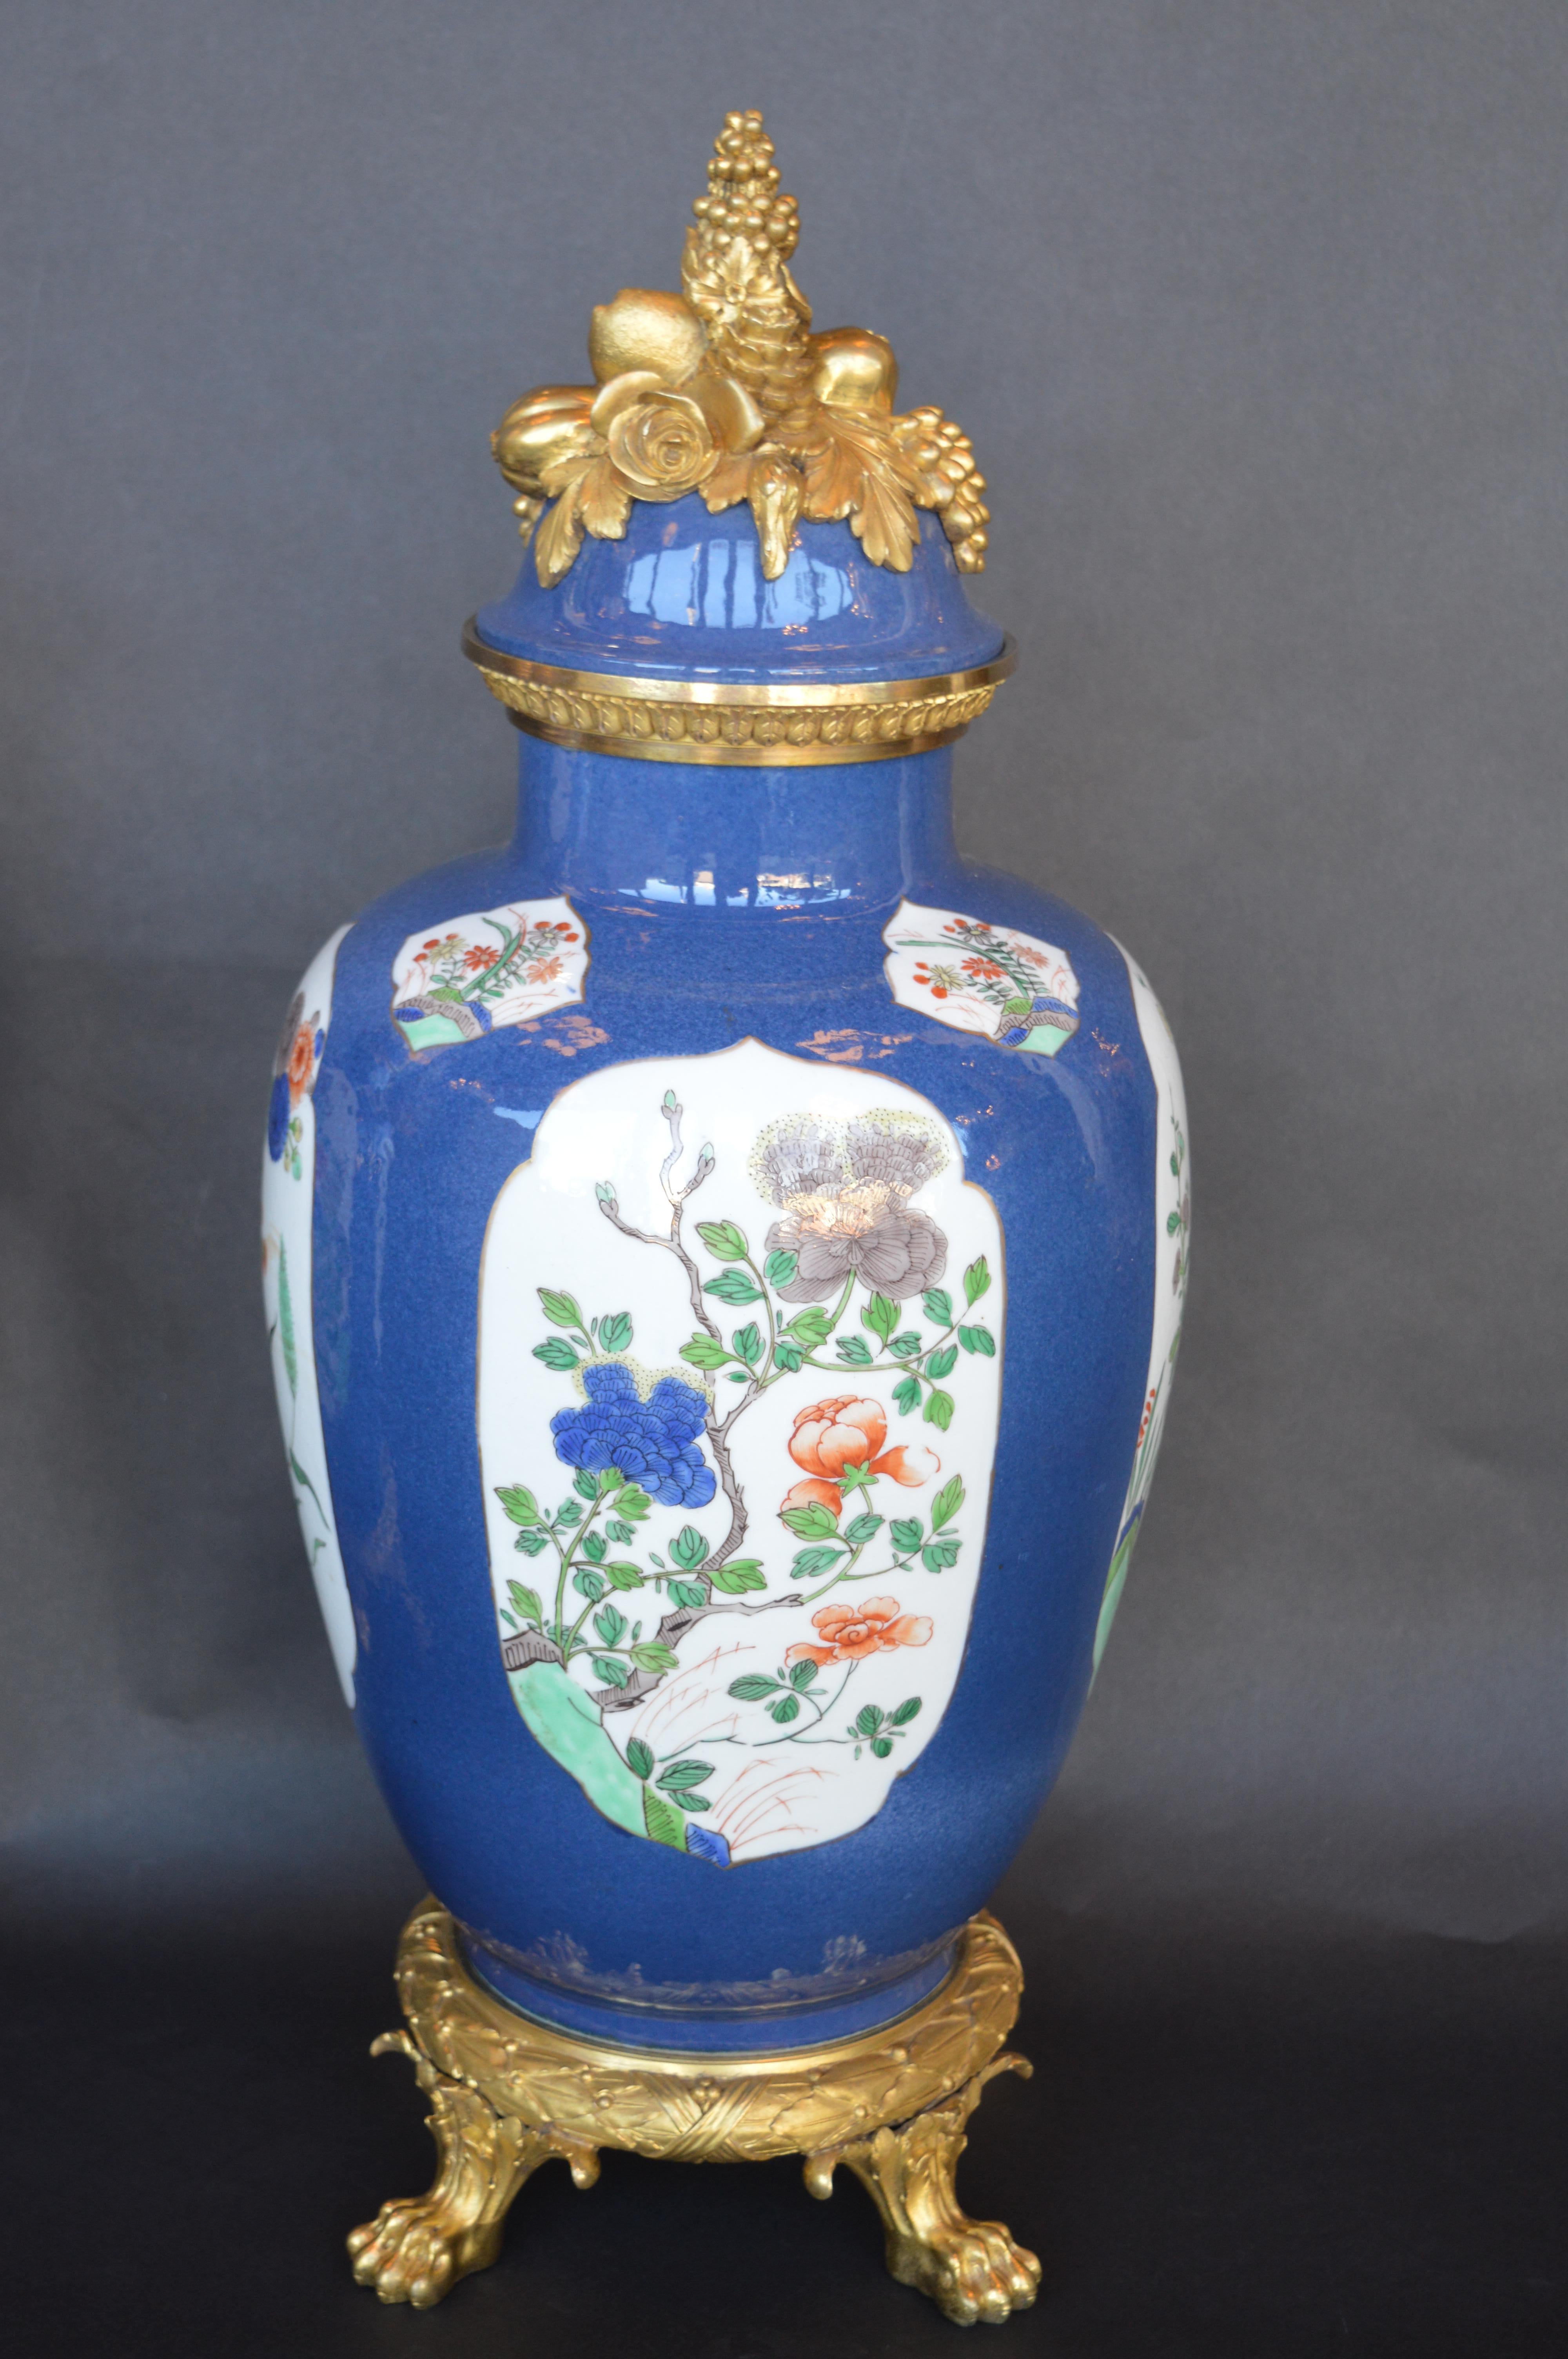 Pair of 19th century ormolu-mounted Chinese porcelain vases.